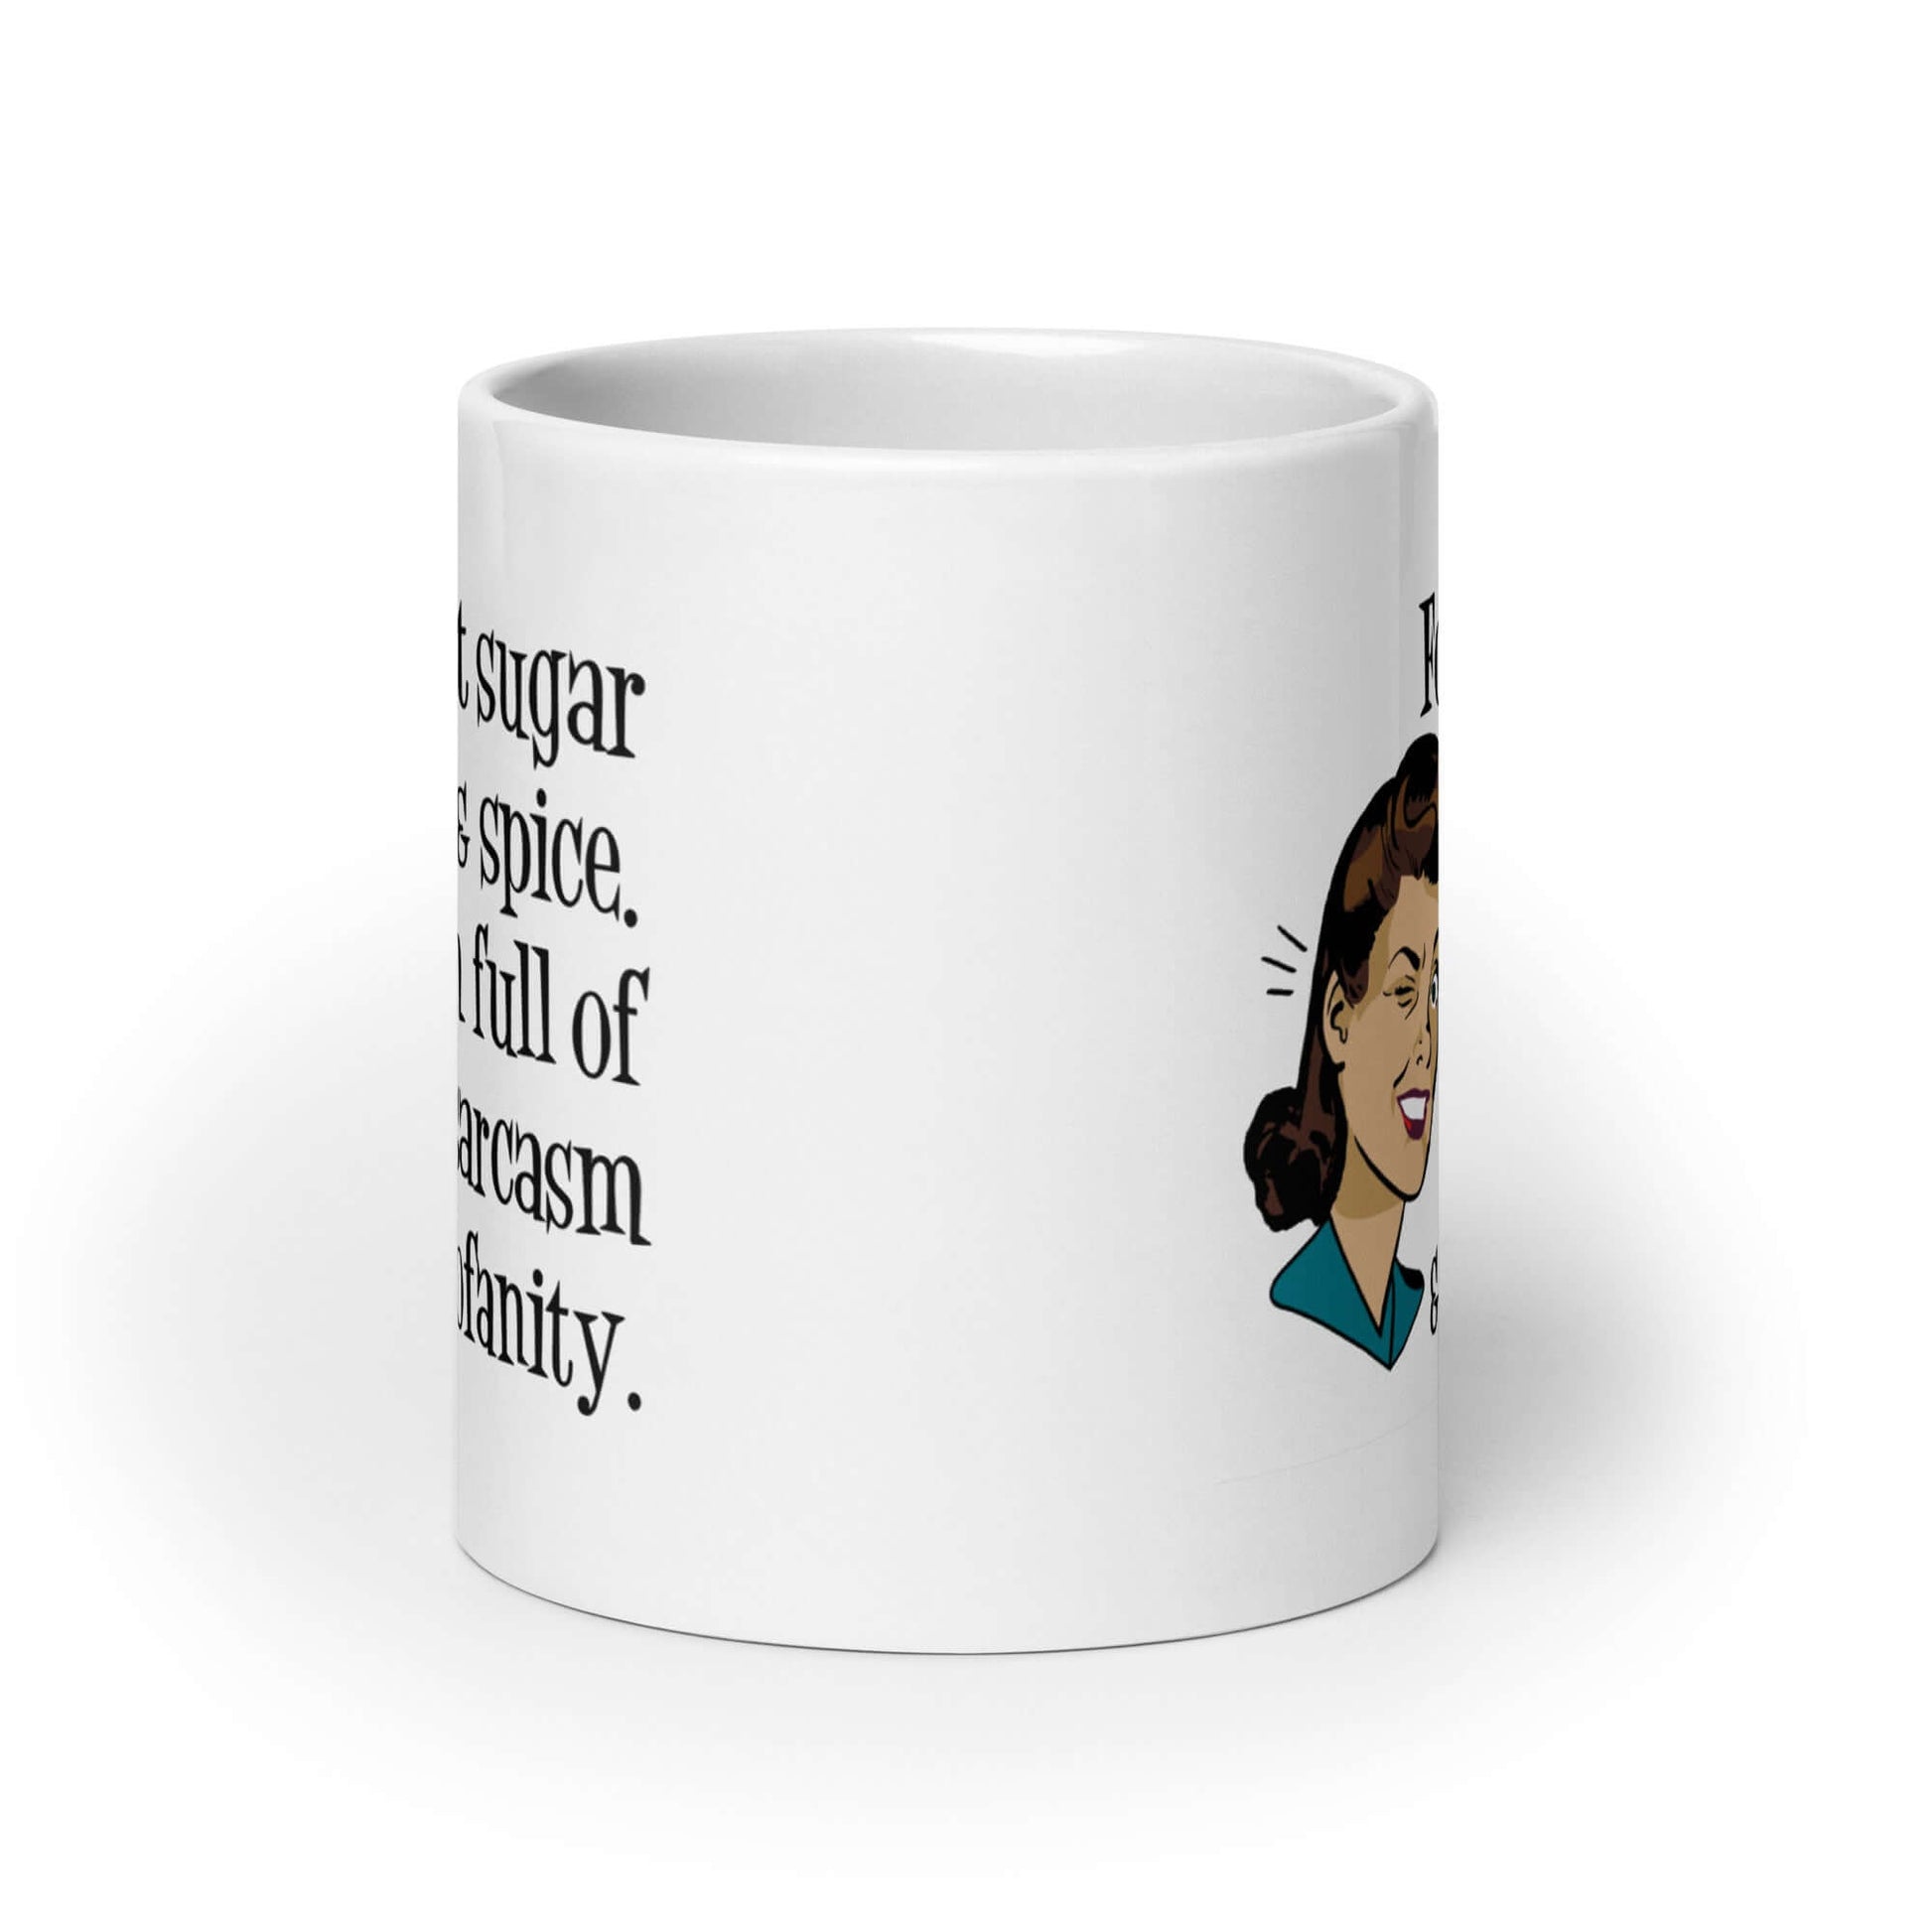 White ceramic coffee mug with image of winking retro woman and the words Forget sugar and spice, I'm full of sarcasm and profanity.